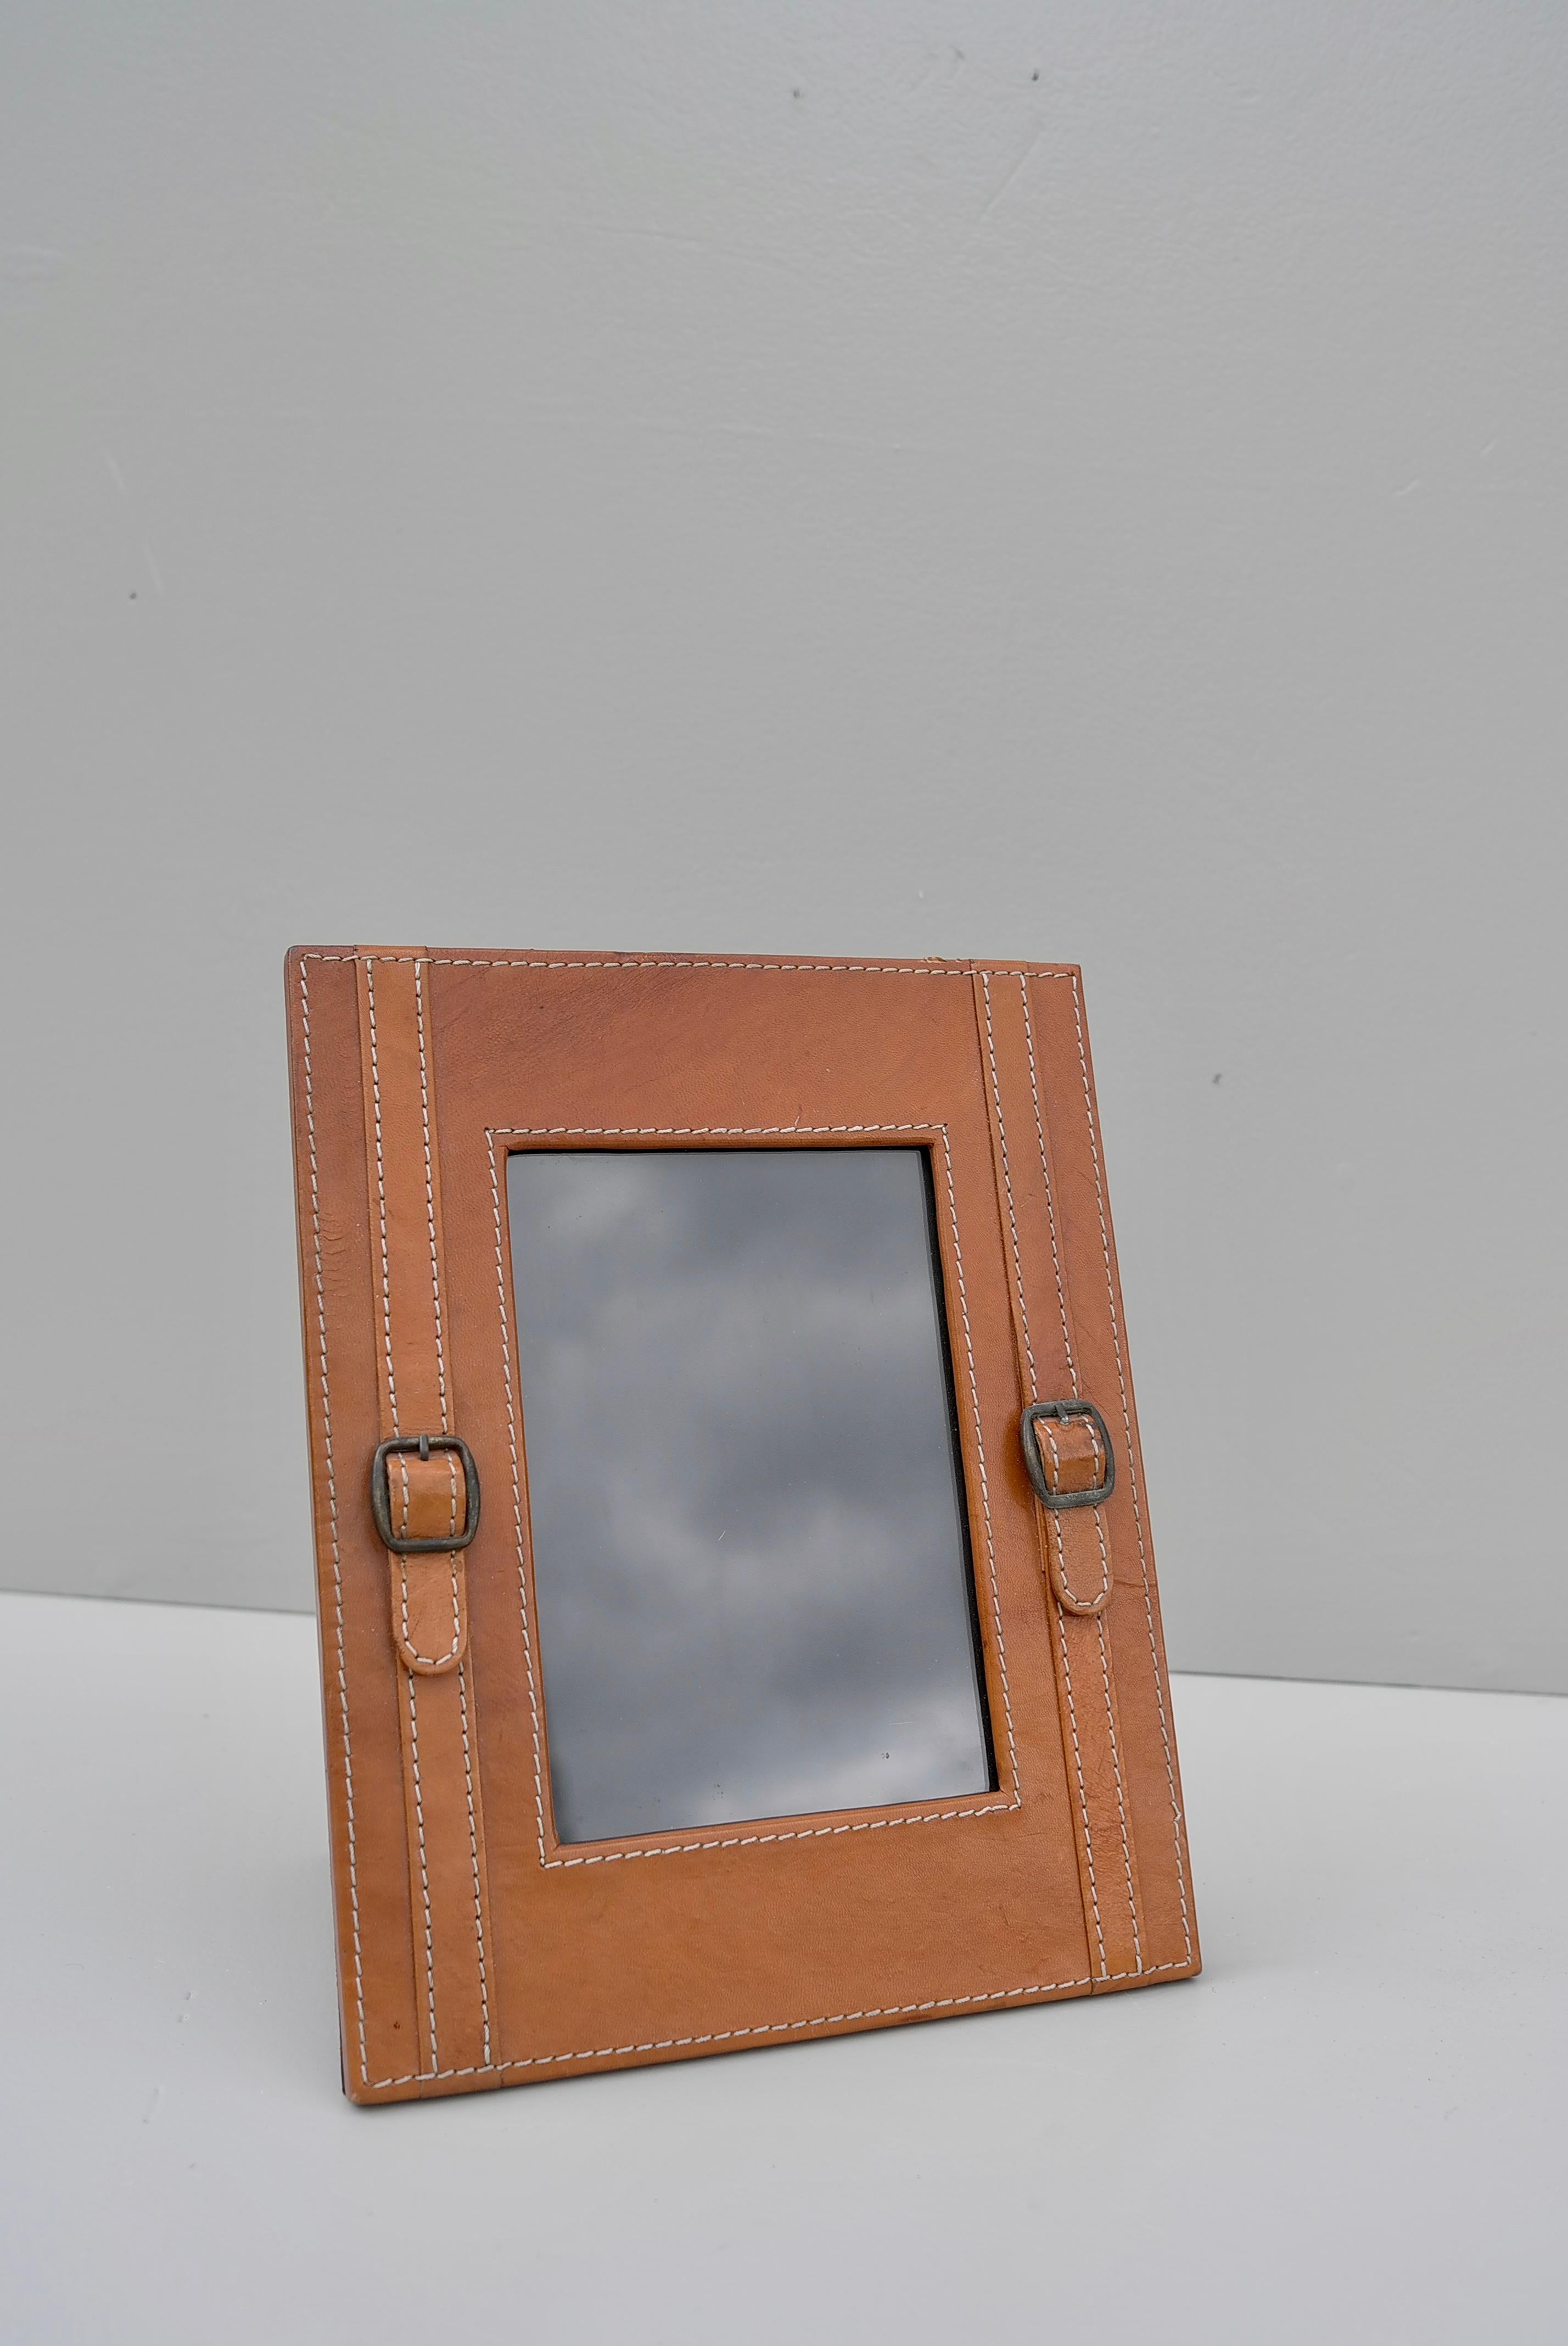 20th Century Hand-Stitched Cognac Leather Picture Frame in Style of Jacques Adnet